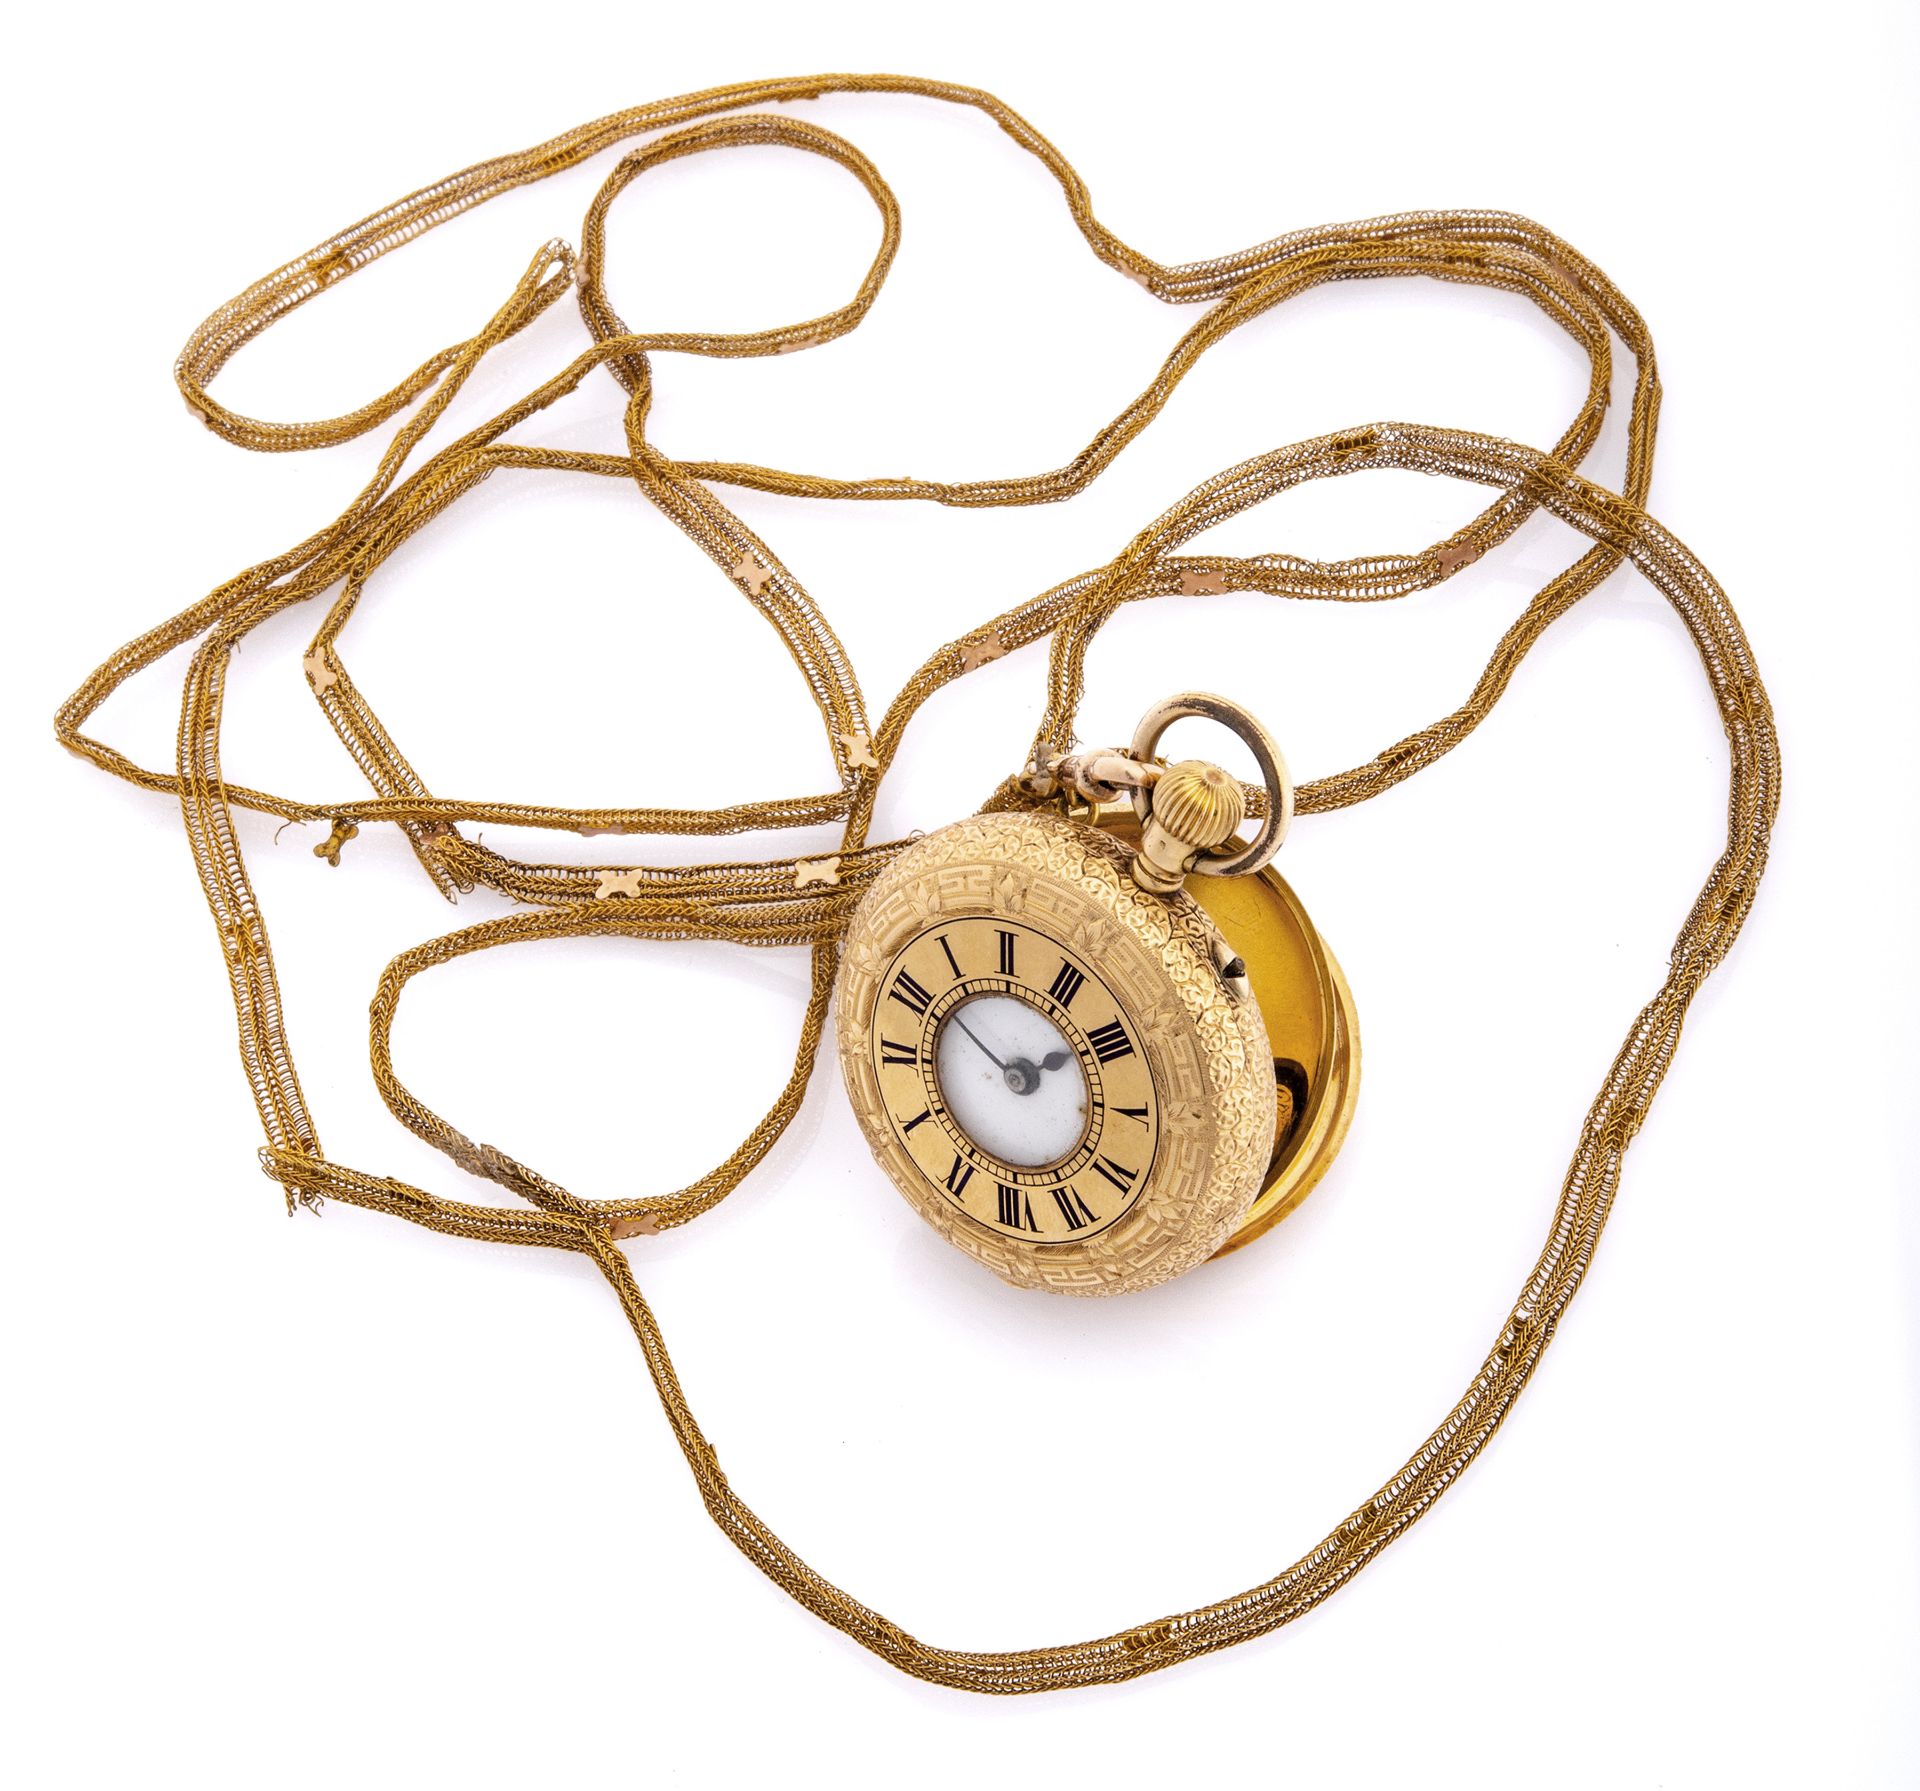 GOLD POCKET WATCH WITH GOLD CHAIN